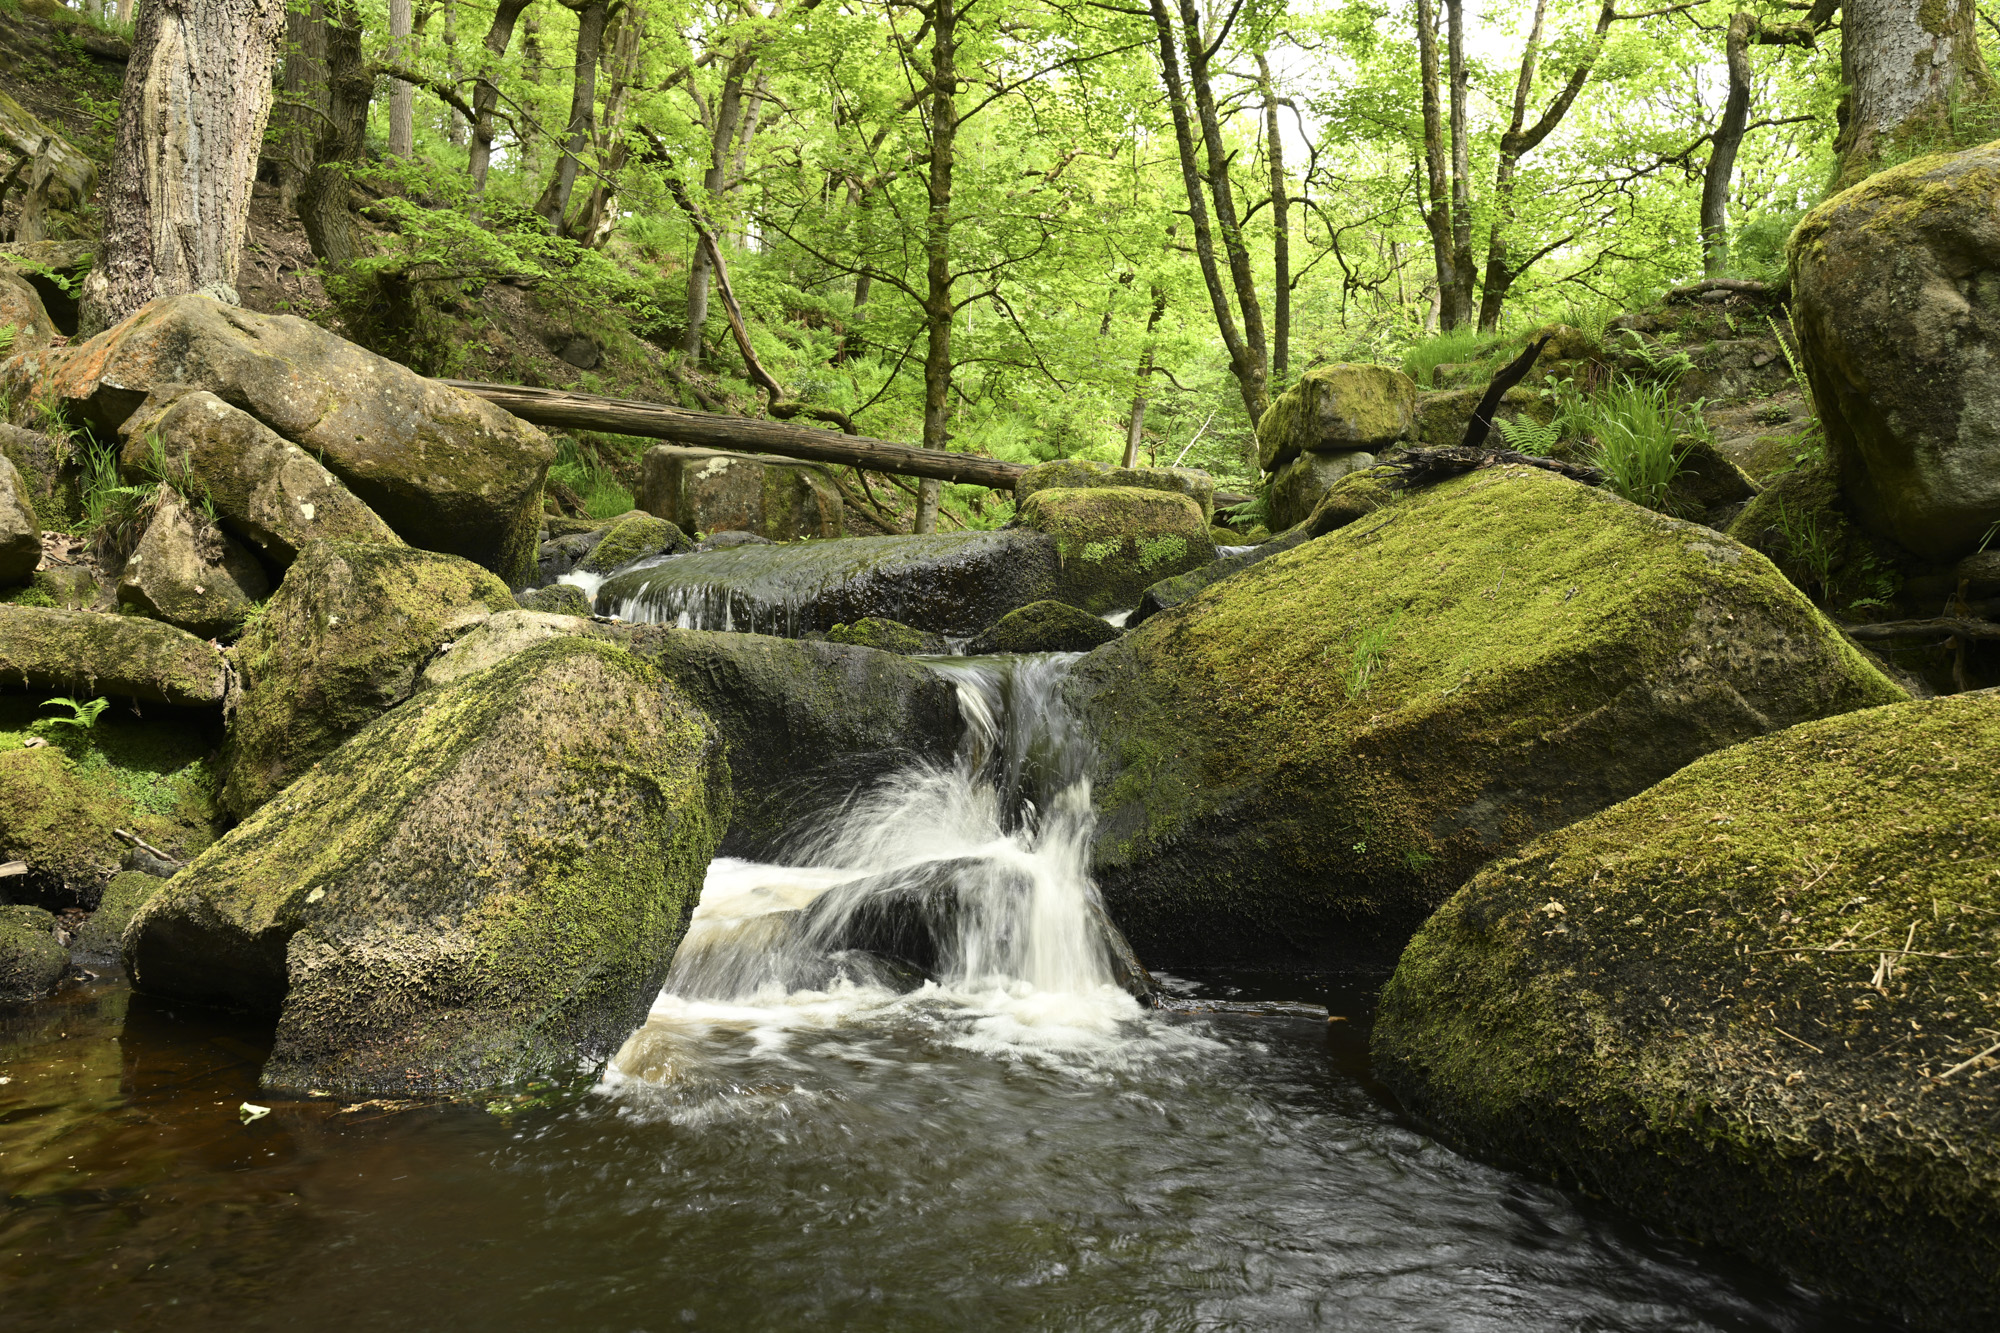 A woodland and rocky stream with motion blur in the moving water